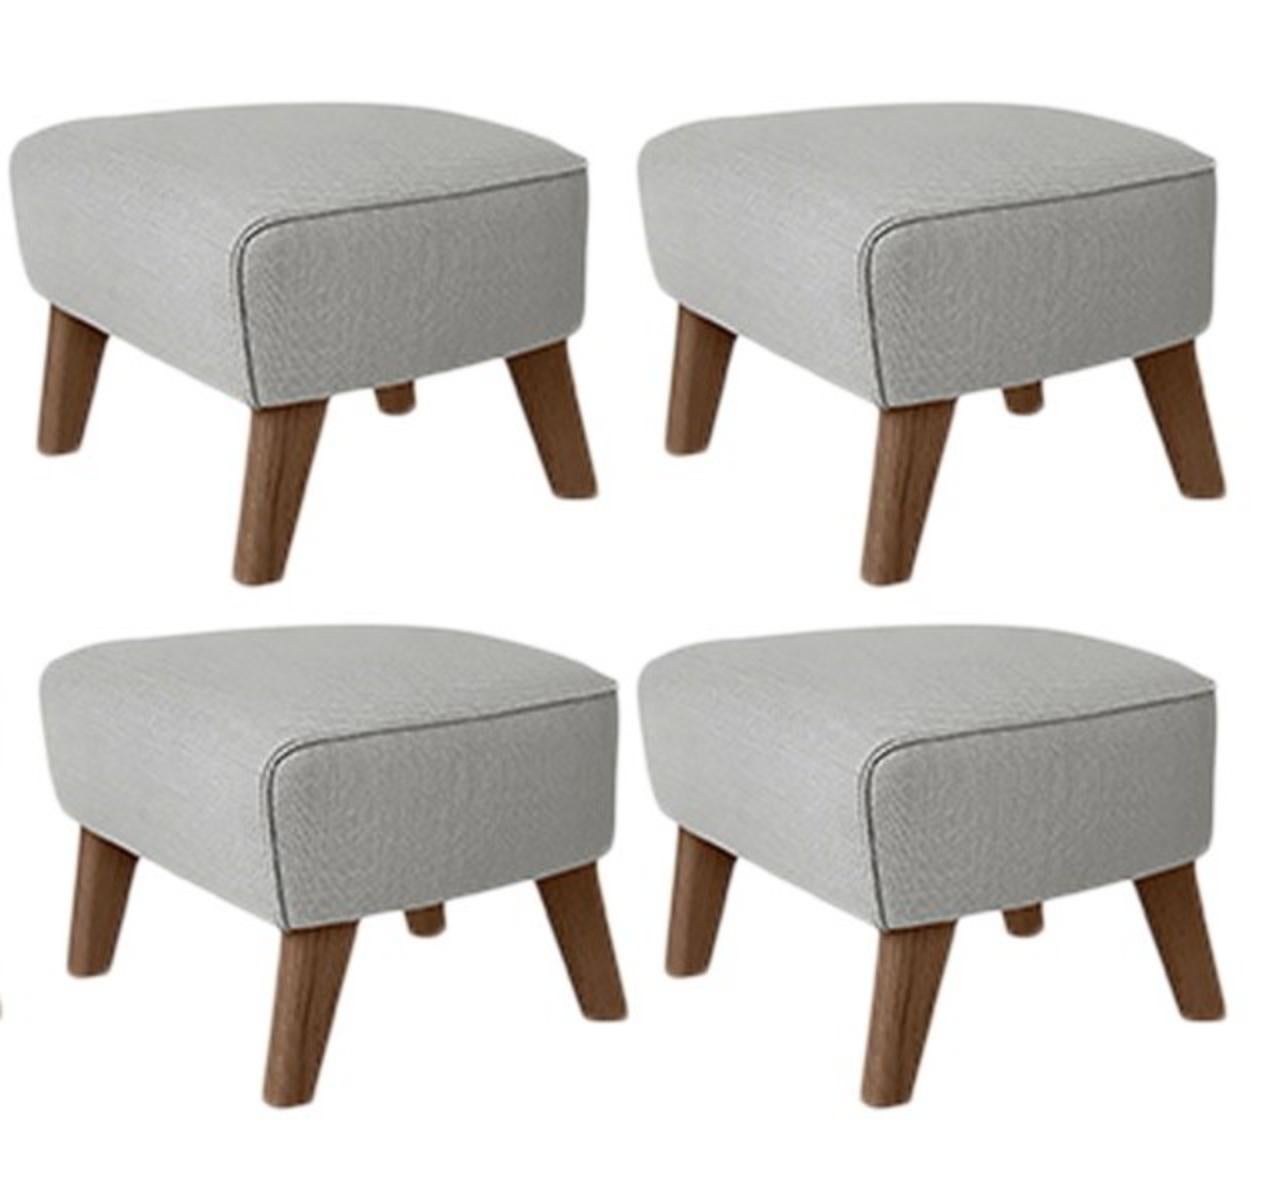 Set of 4 light grey, smoked Oak Raf Simons Vidar 3 My Own chair footstool by Lassen
Dimensions: W 56 x D 58 x H 40 cm 
Materials: Textile
Also Available: Other colors available.

The My Own Chair footstool has been designed in the same spirit